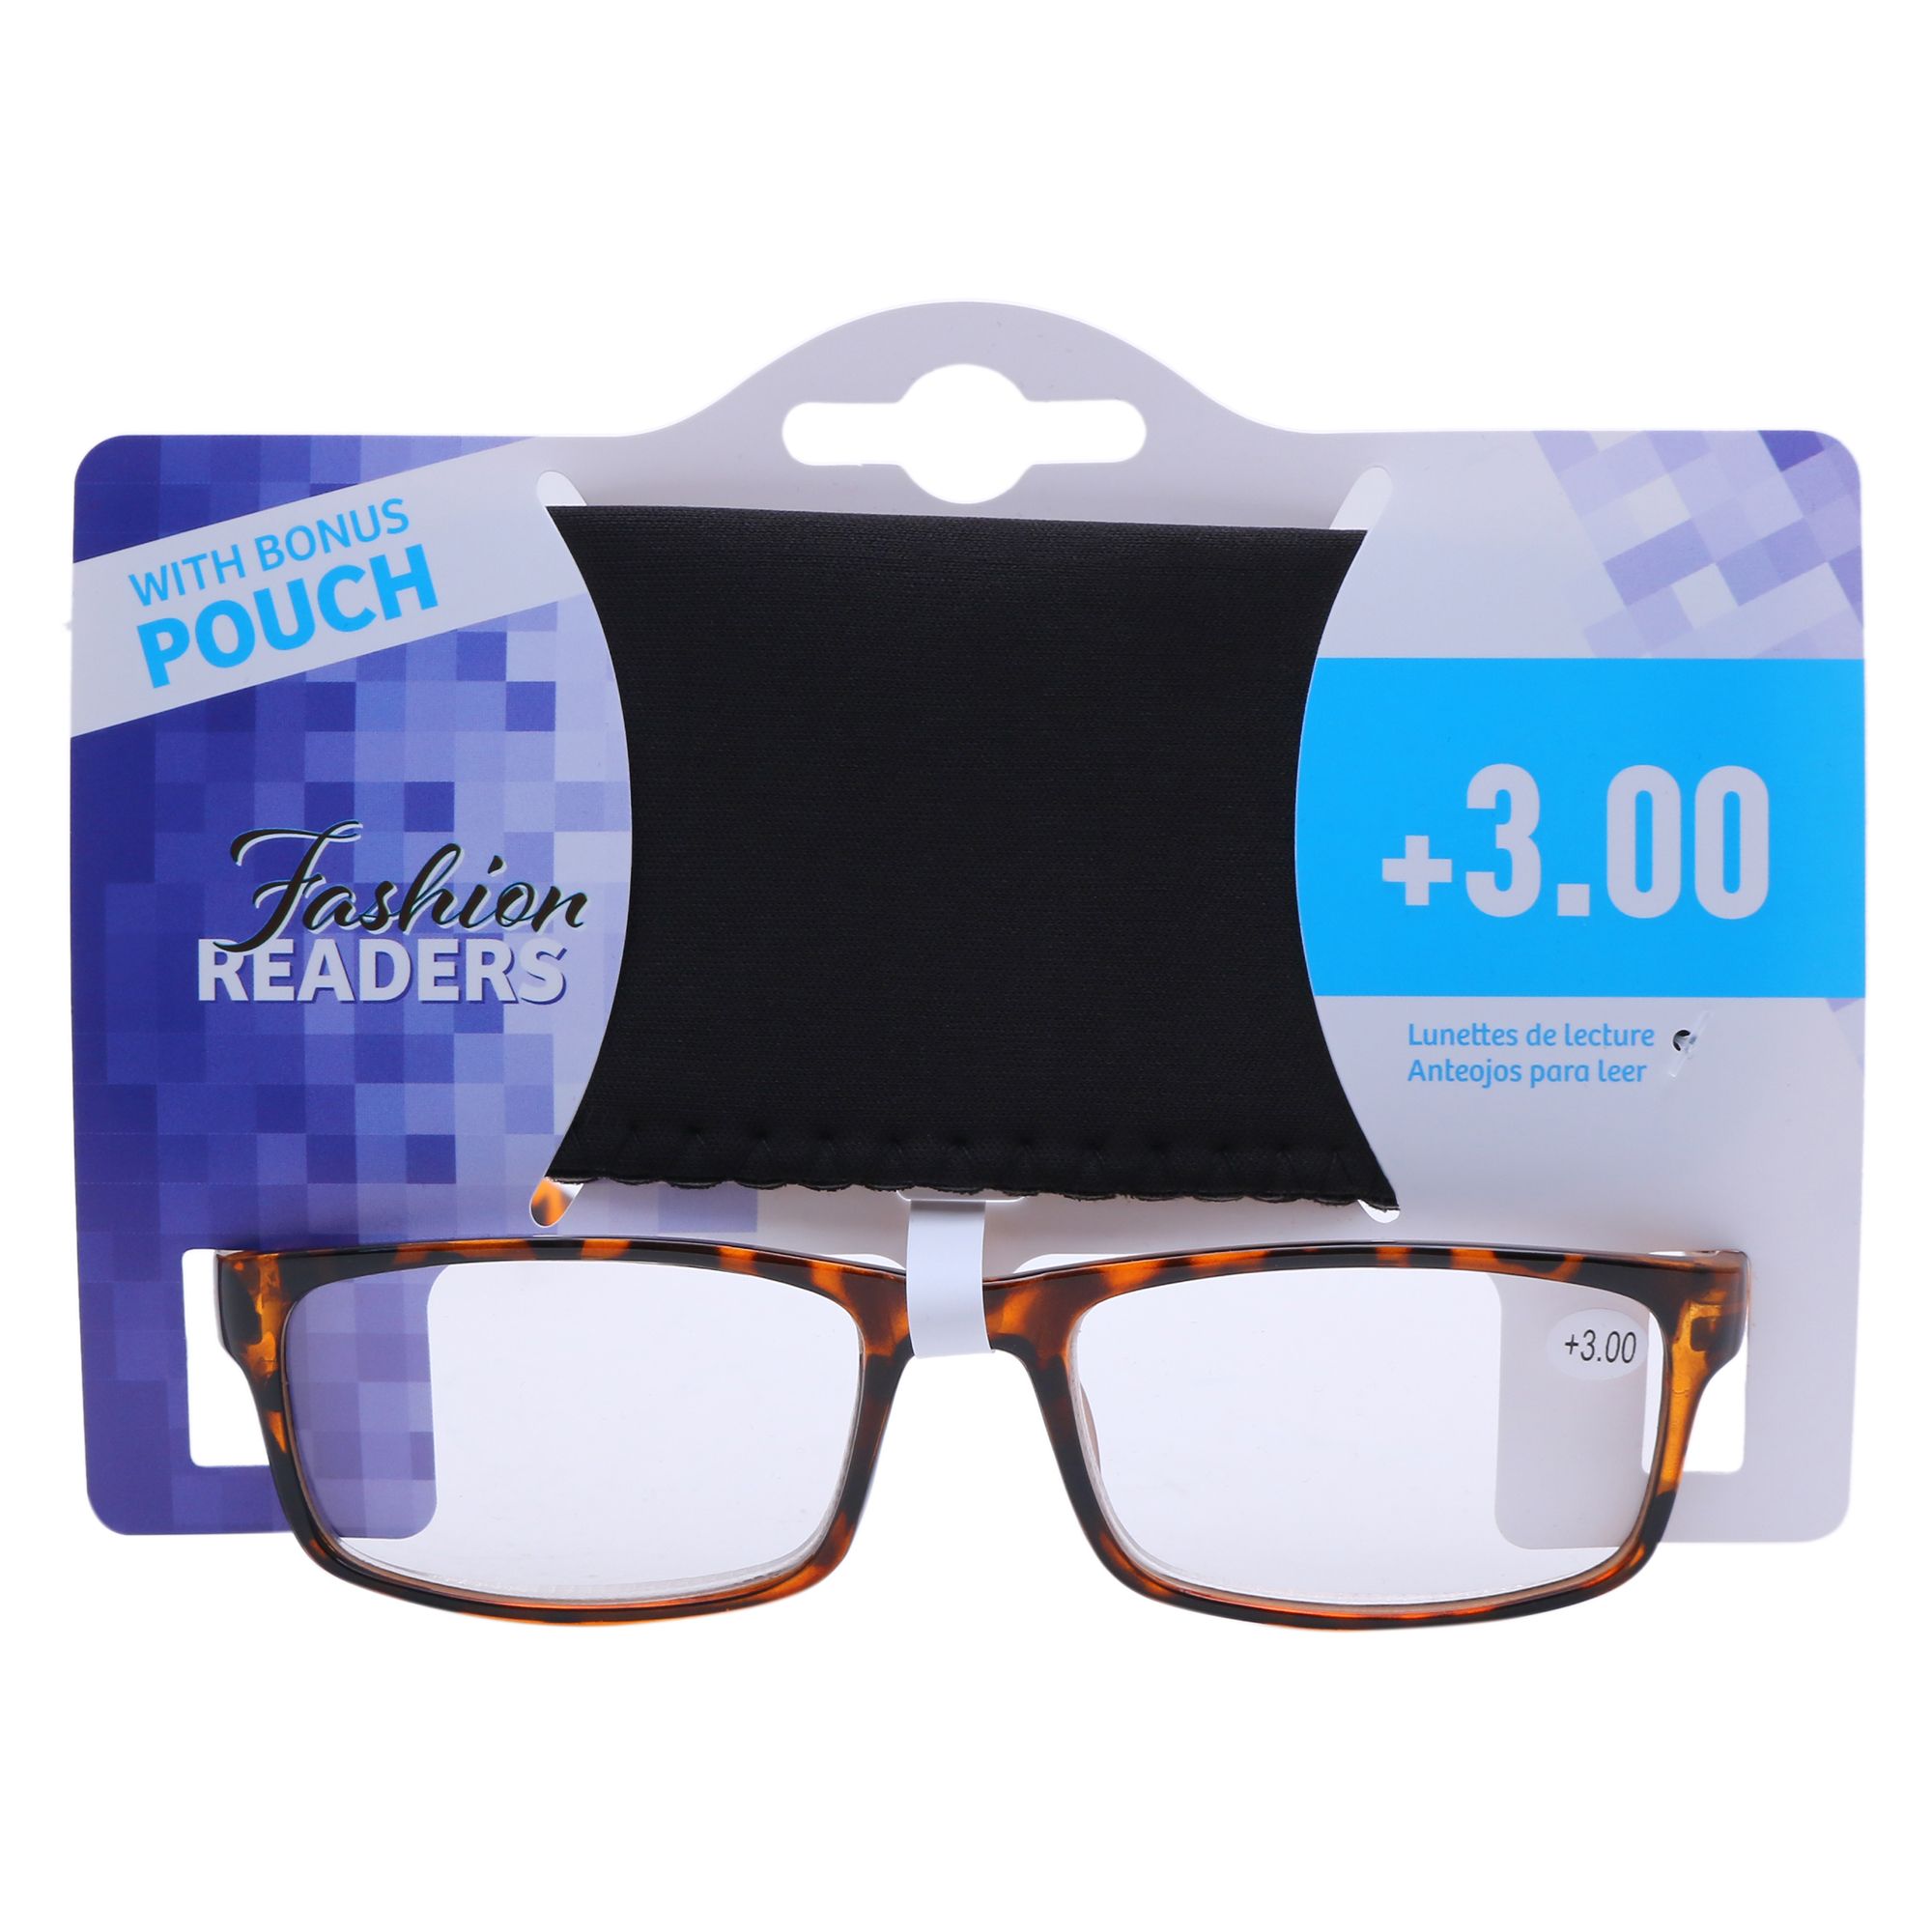 Reading Glasses W/Pouch +3.00